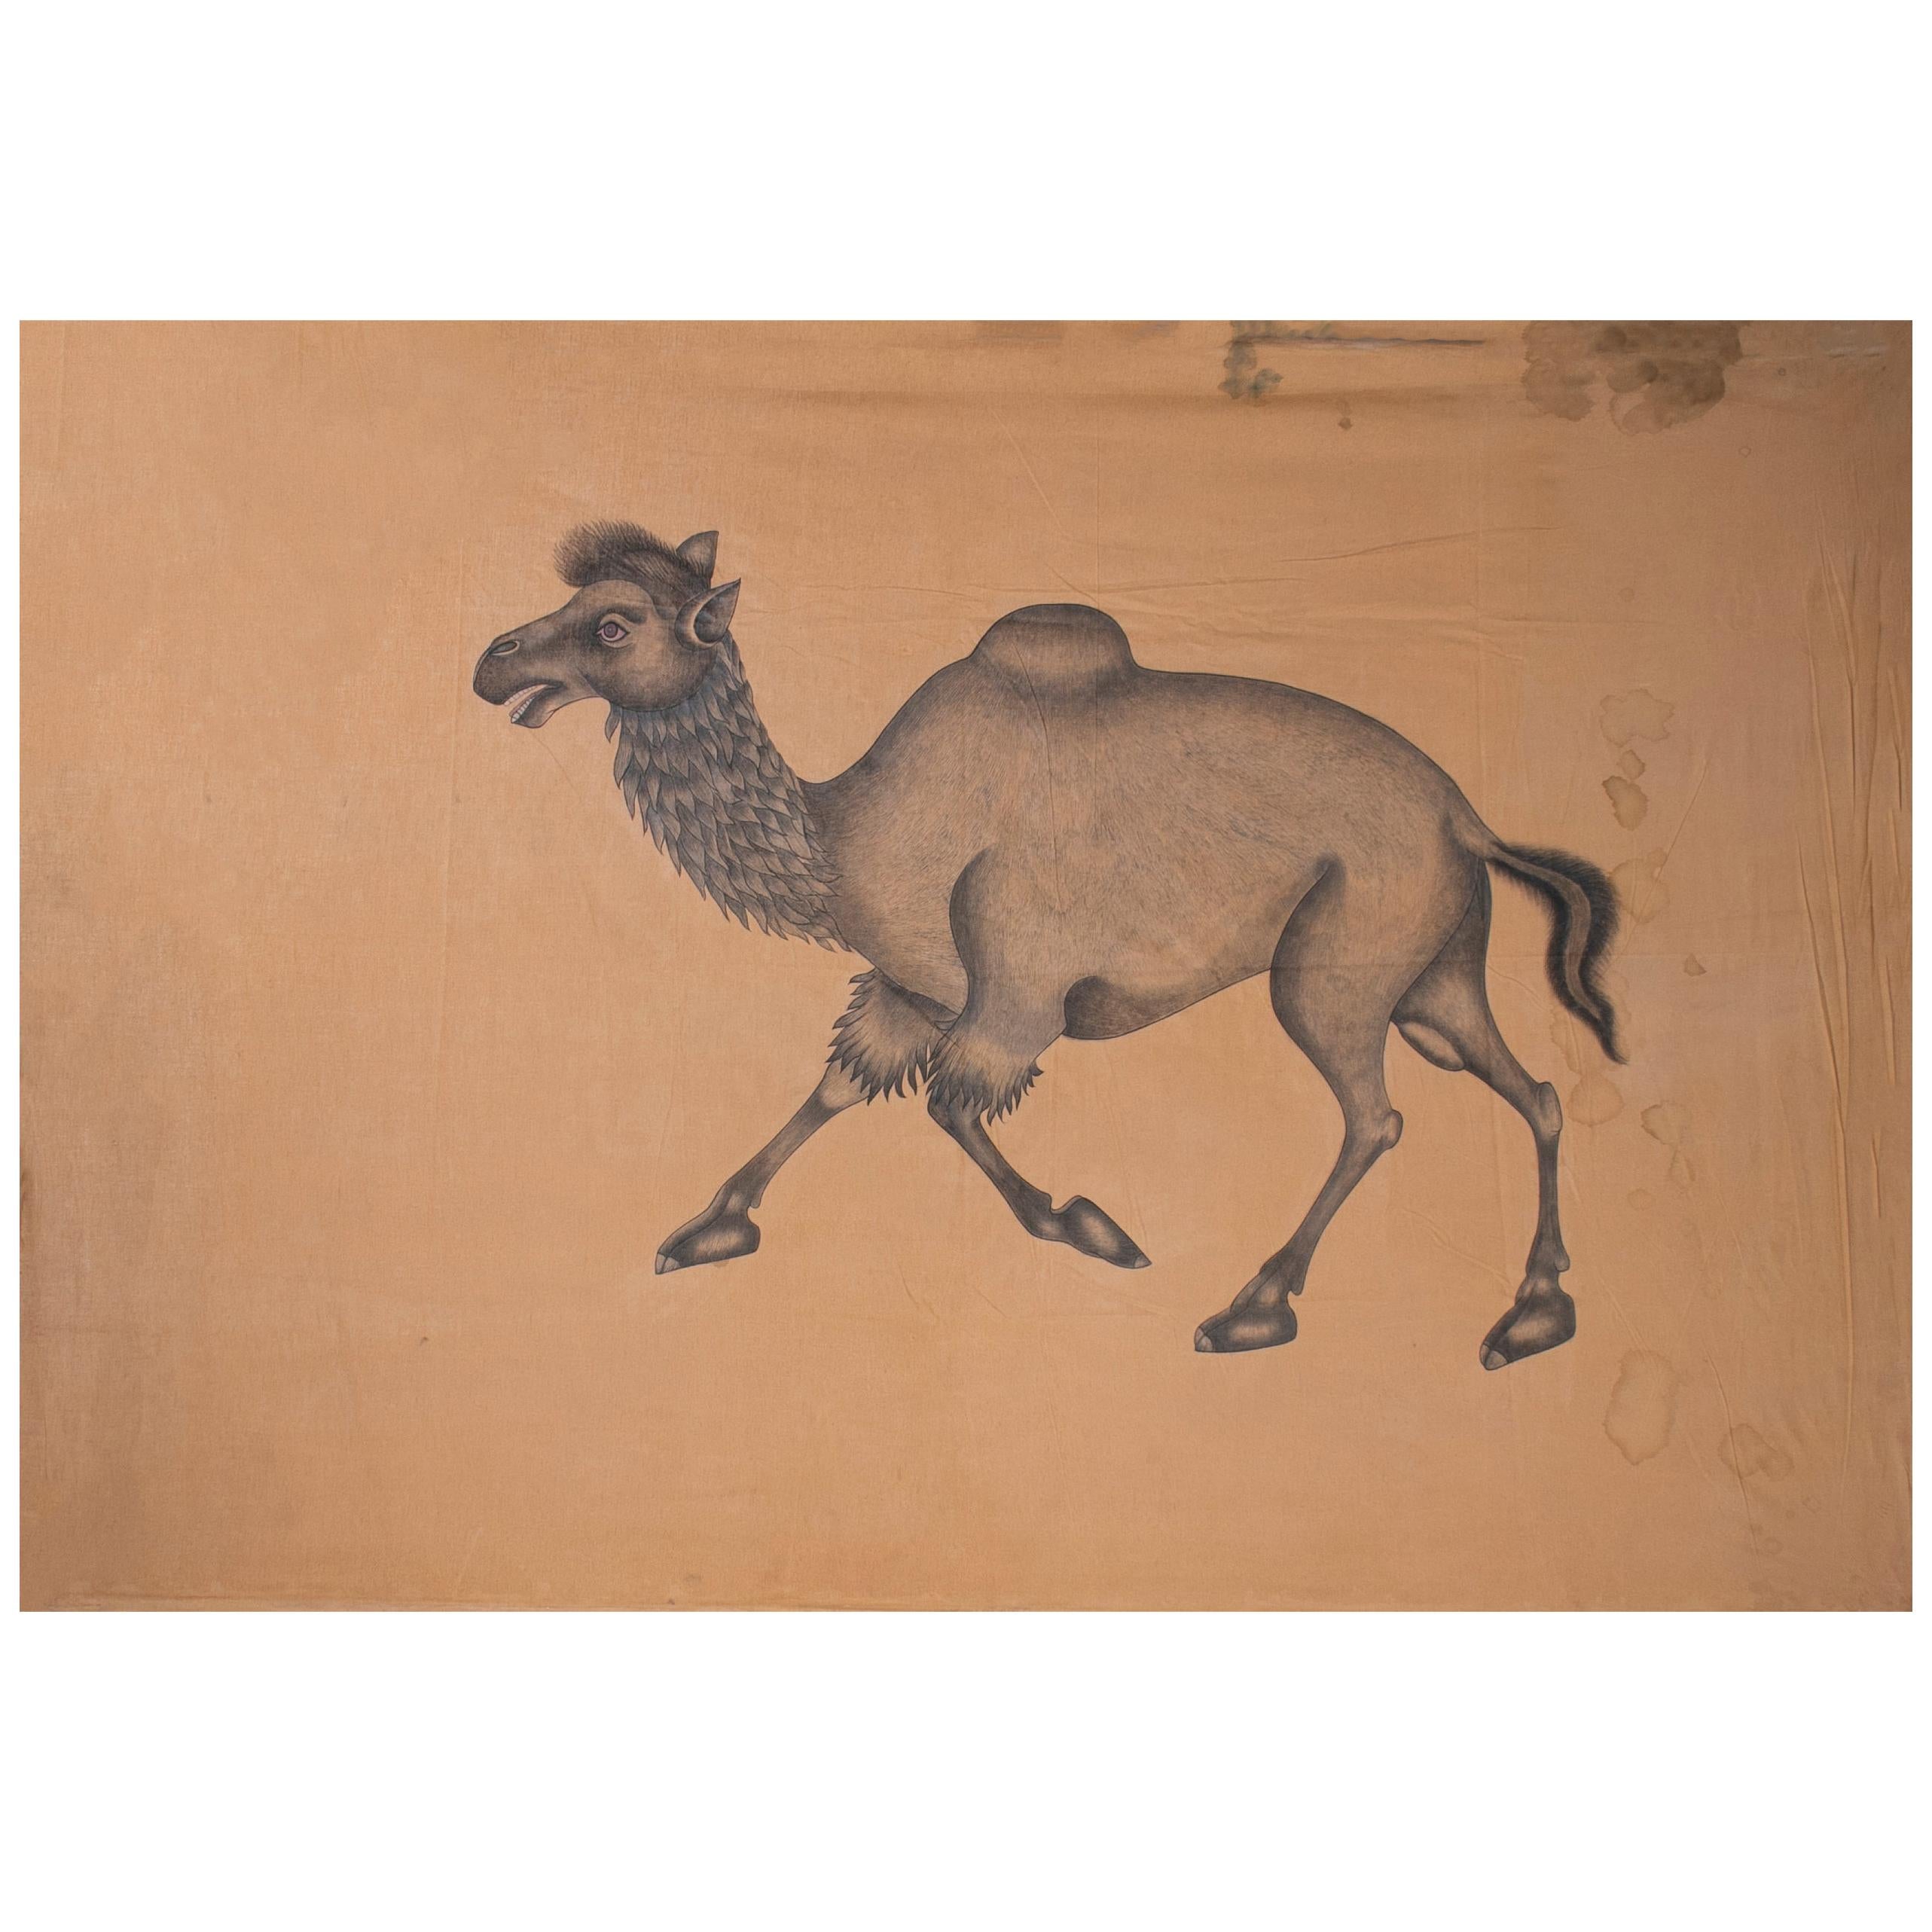 1970s Indian Painting "Walking Camel" Oil on Canvas, Jaime Parlade Design